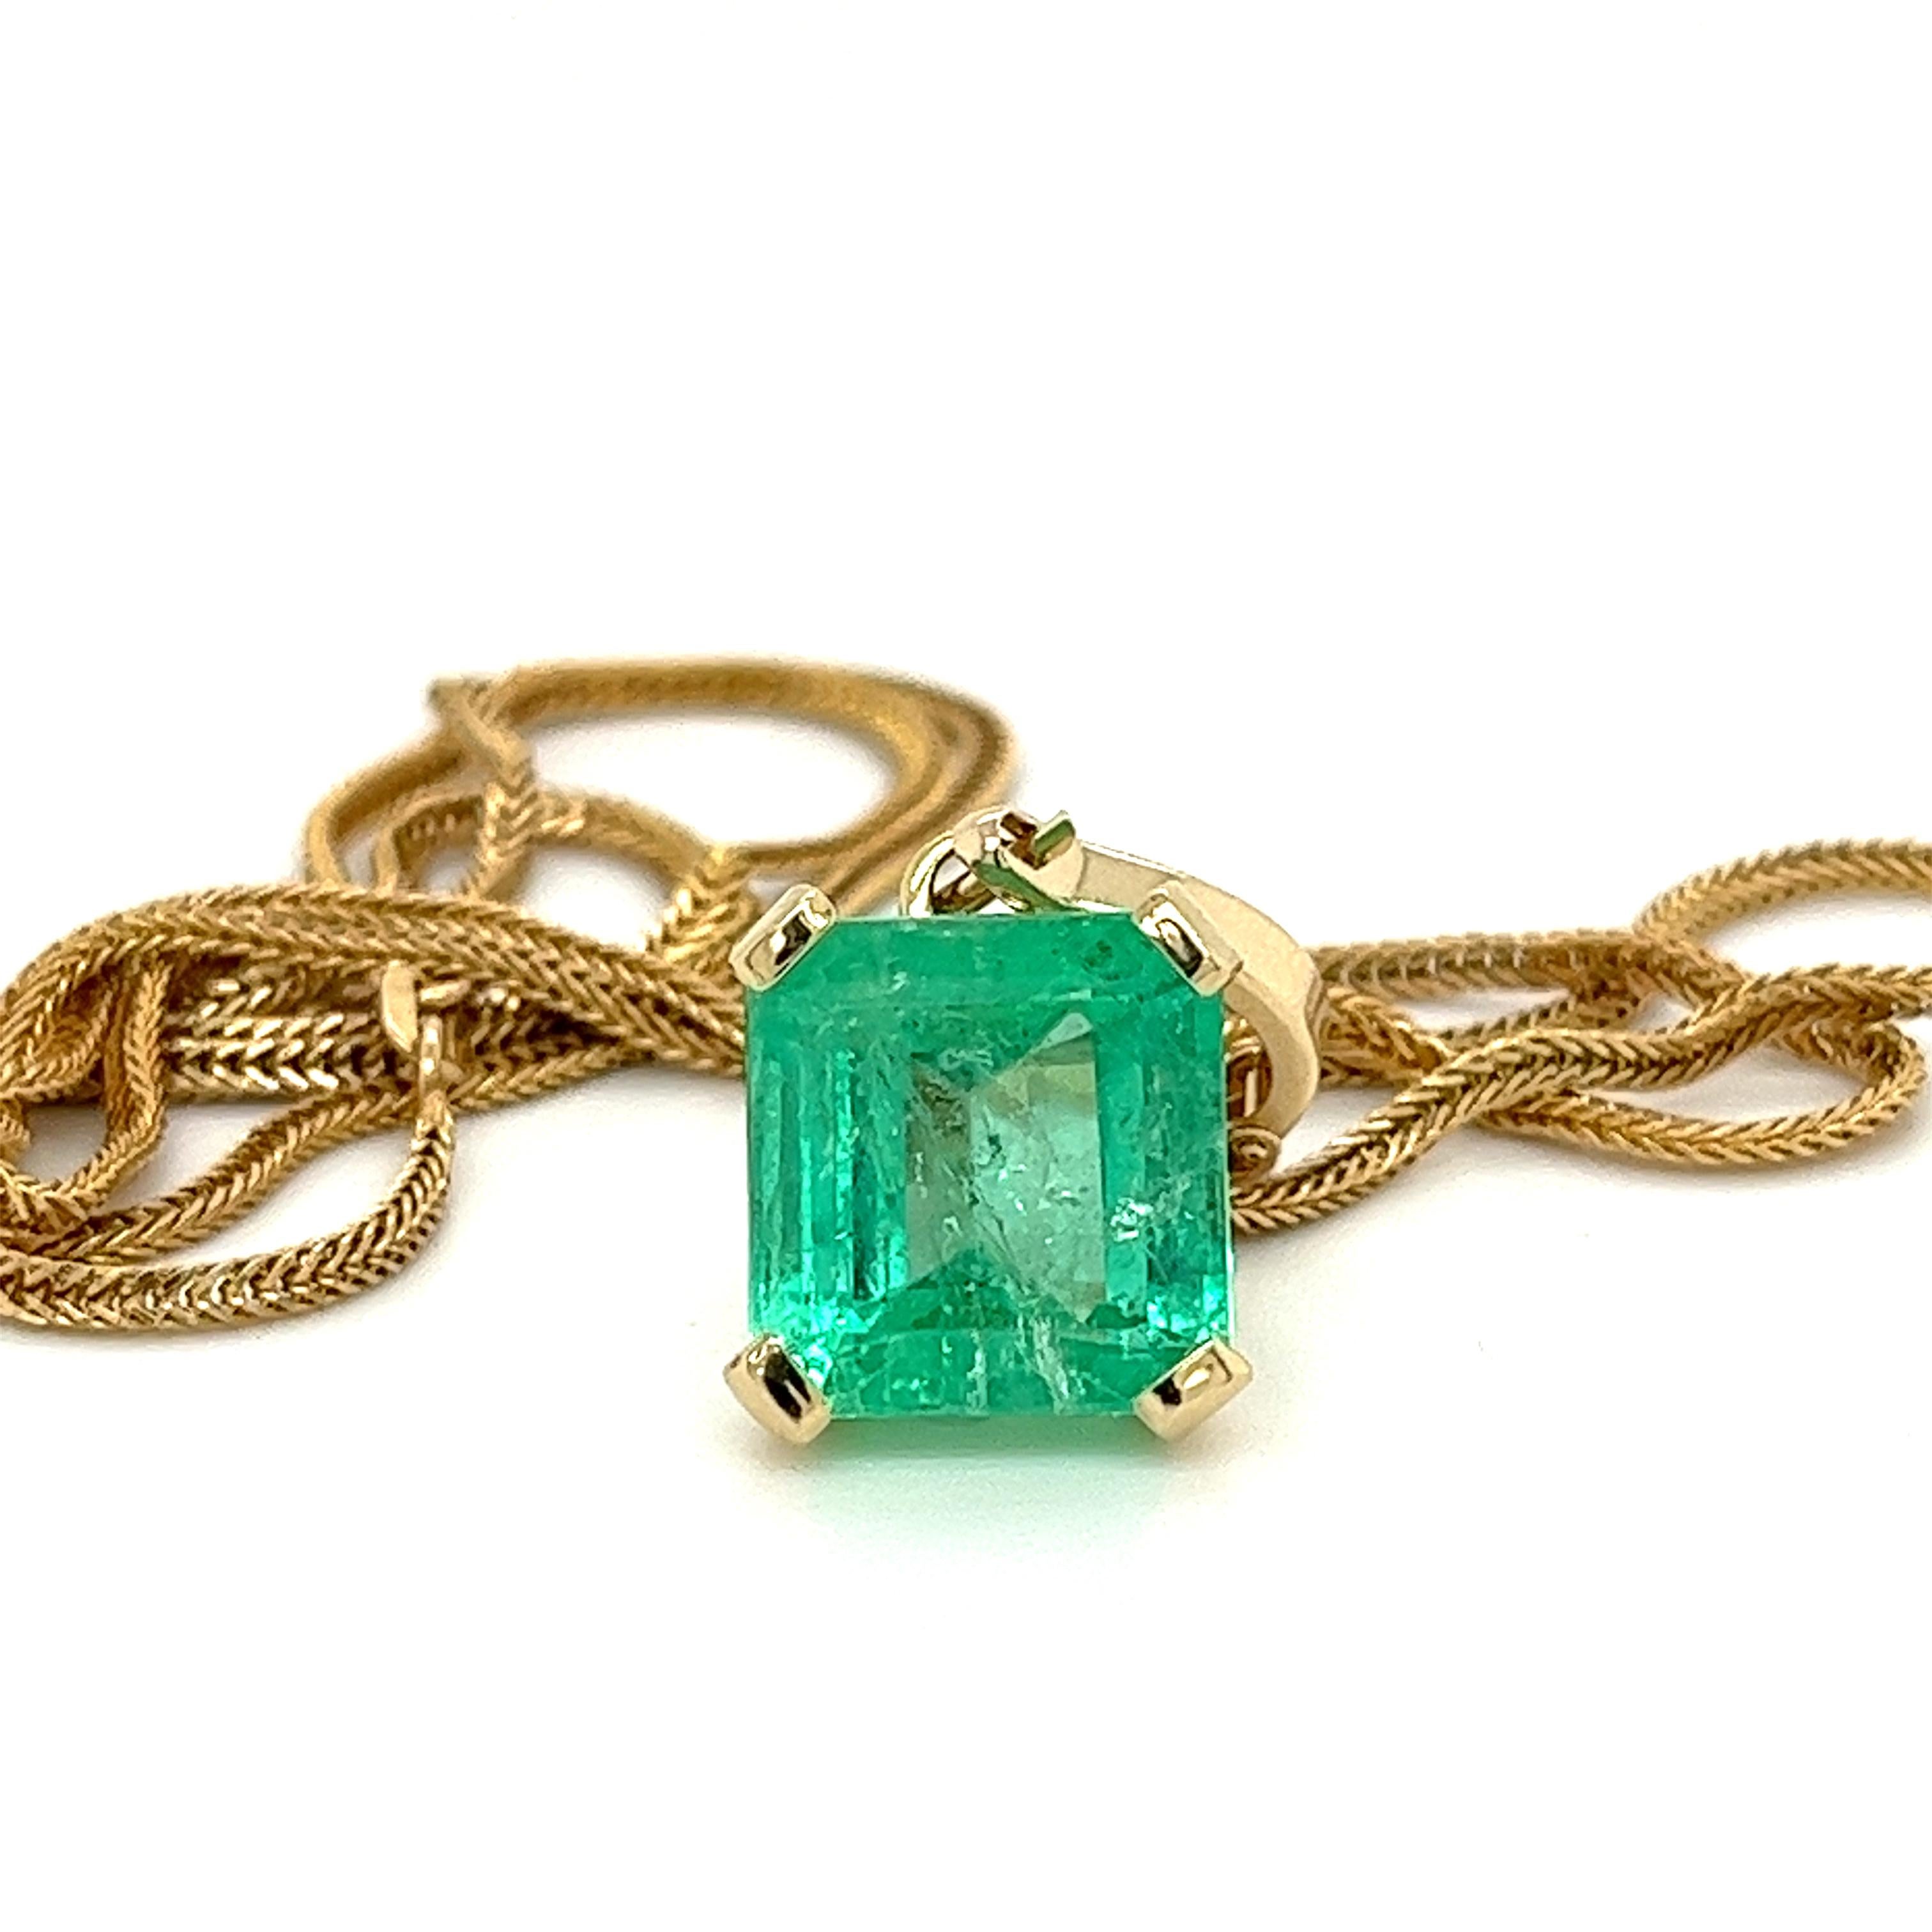 Emerald Cut 8.34 Carat Colombian Emerald Solitaire Pendant Necklace in 14K Gold For Sale